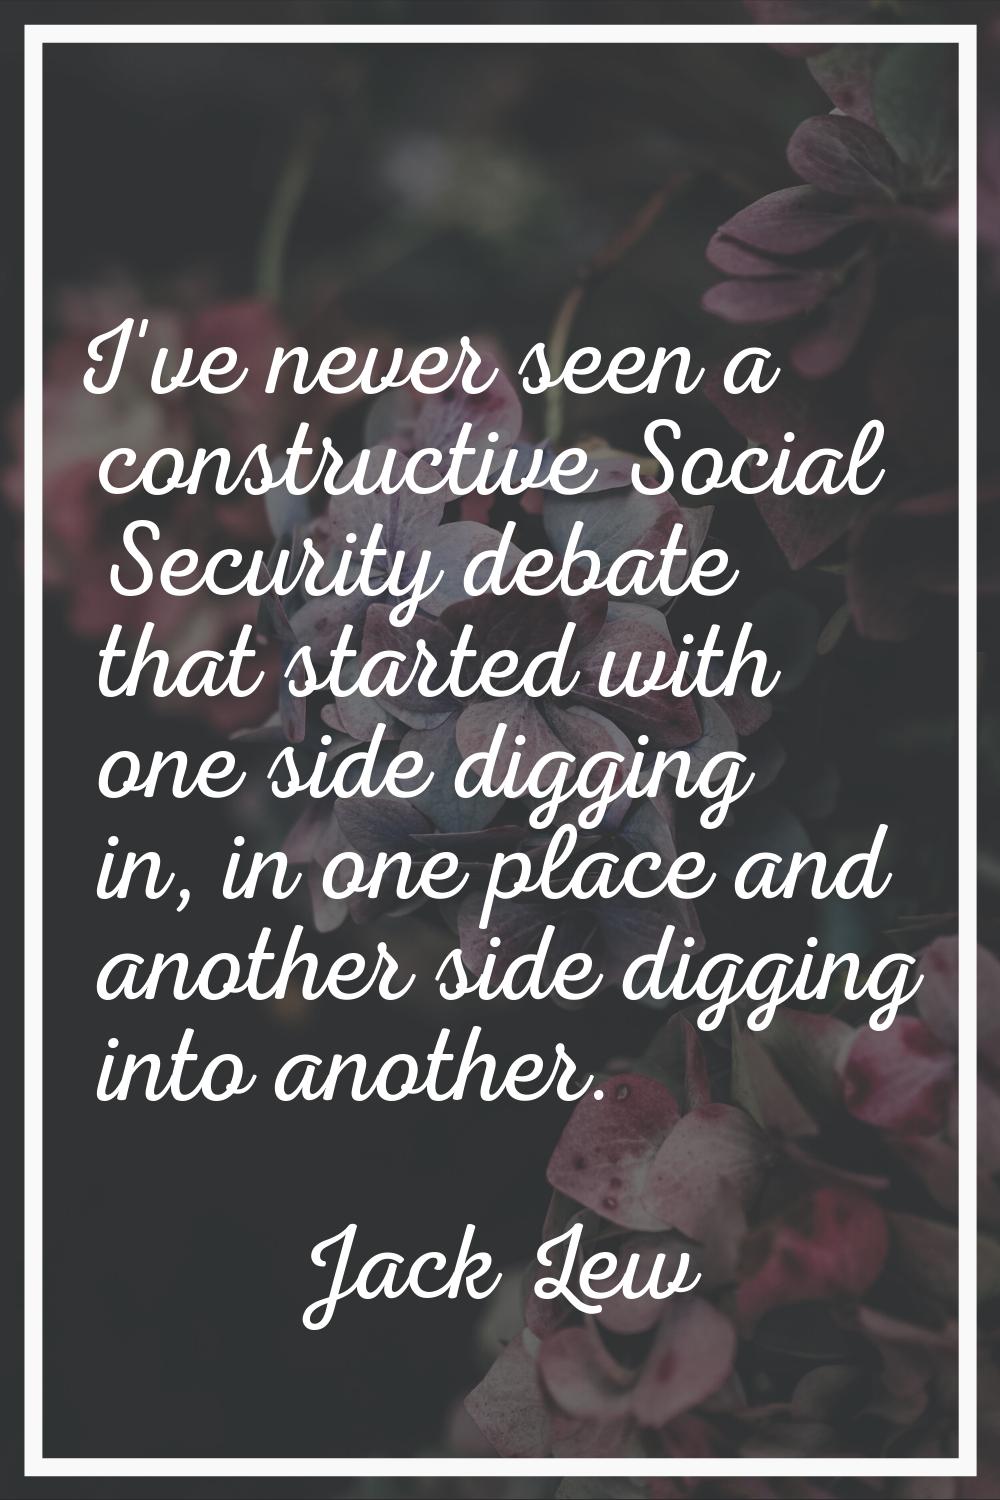 I've never seen a constructive Social Security debate that started with one side digging in, in one